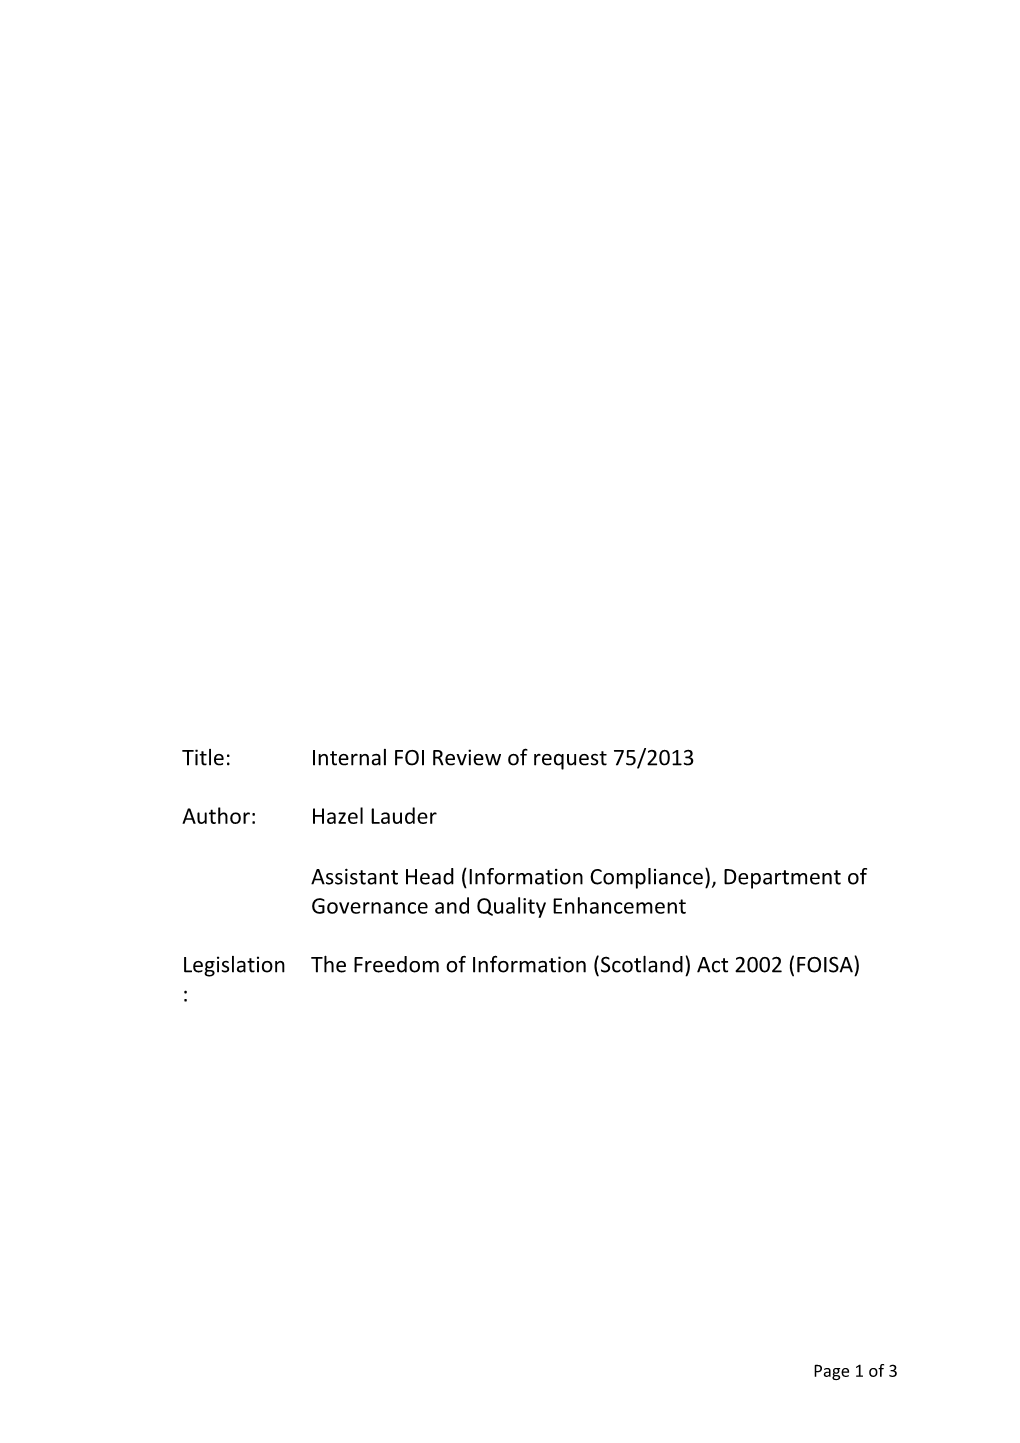 The Freedom of Information (Scotland) Act 2002 (FOISA)